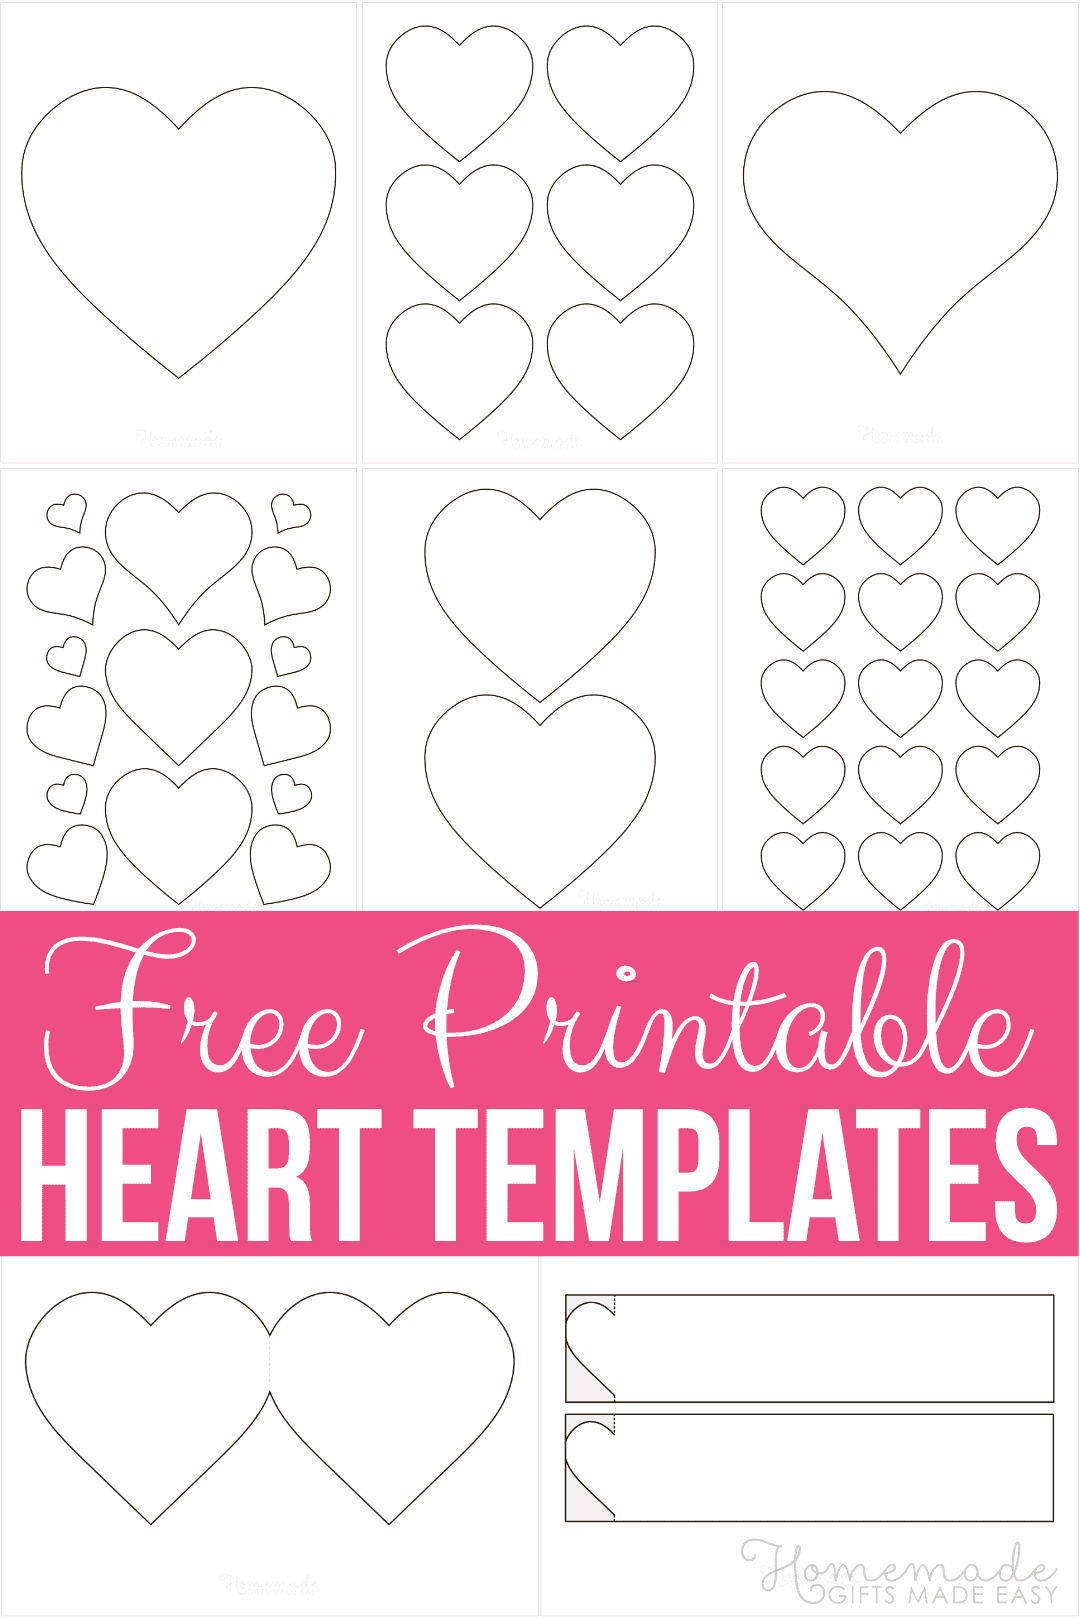 Print Heart Template Printable Free bmppro